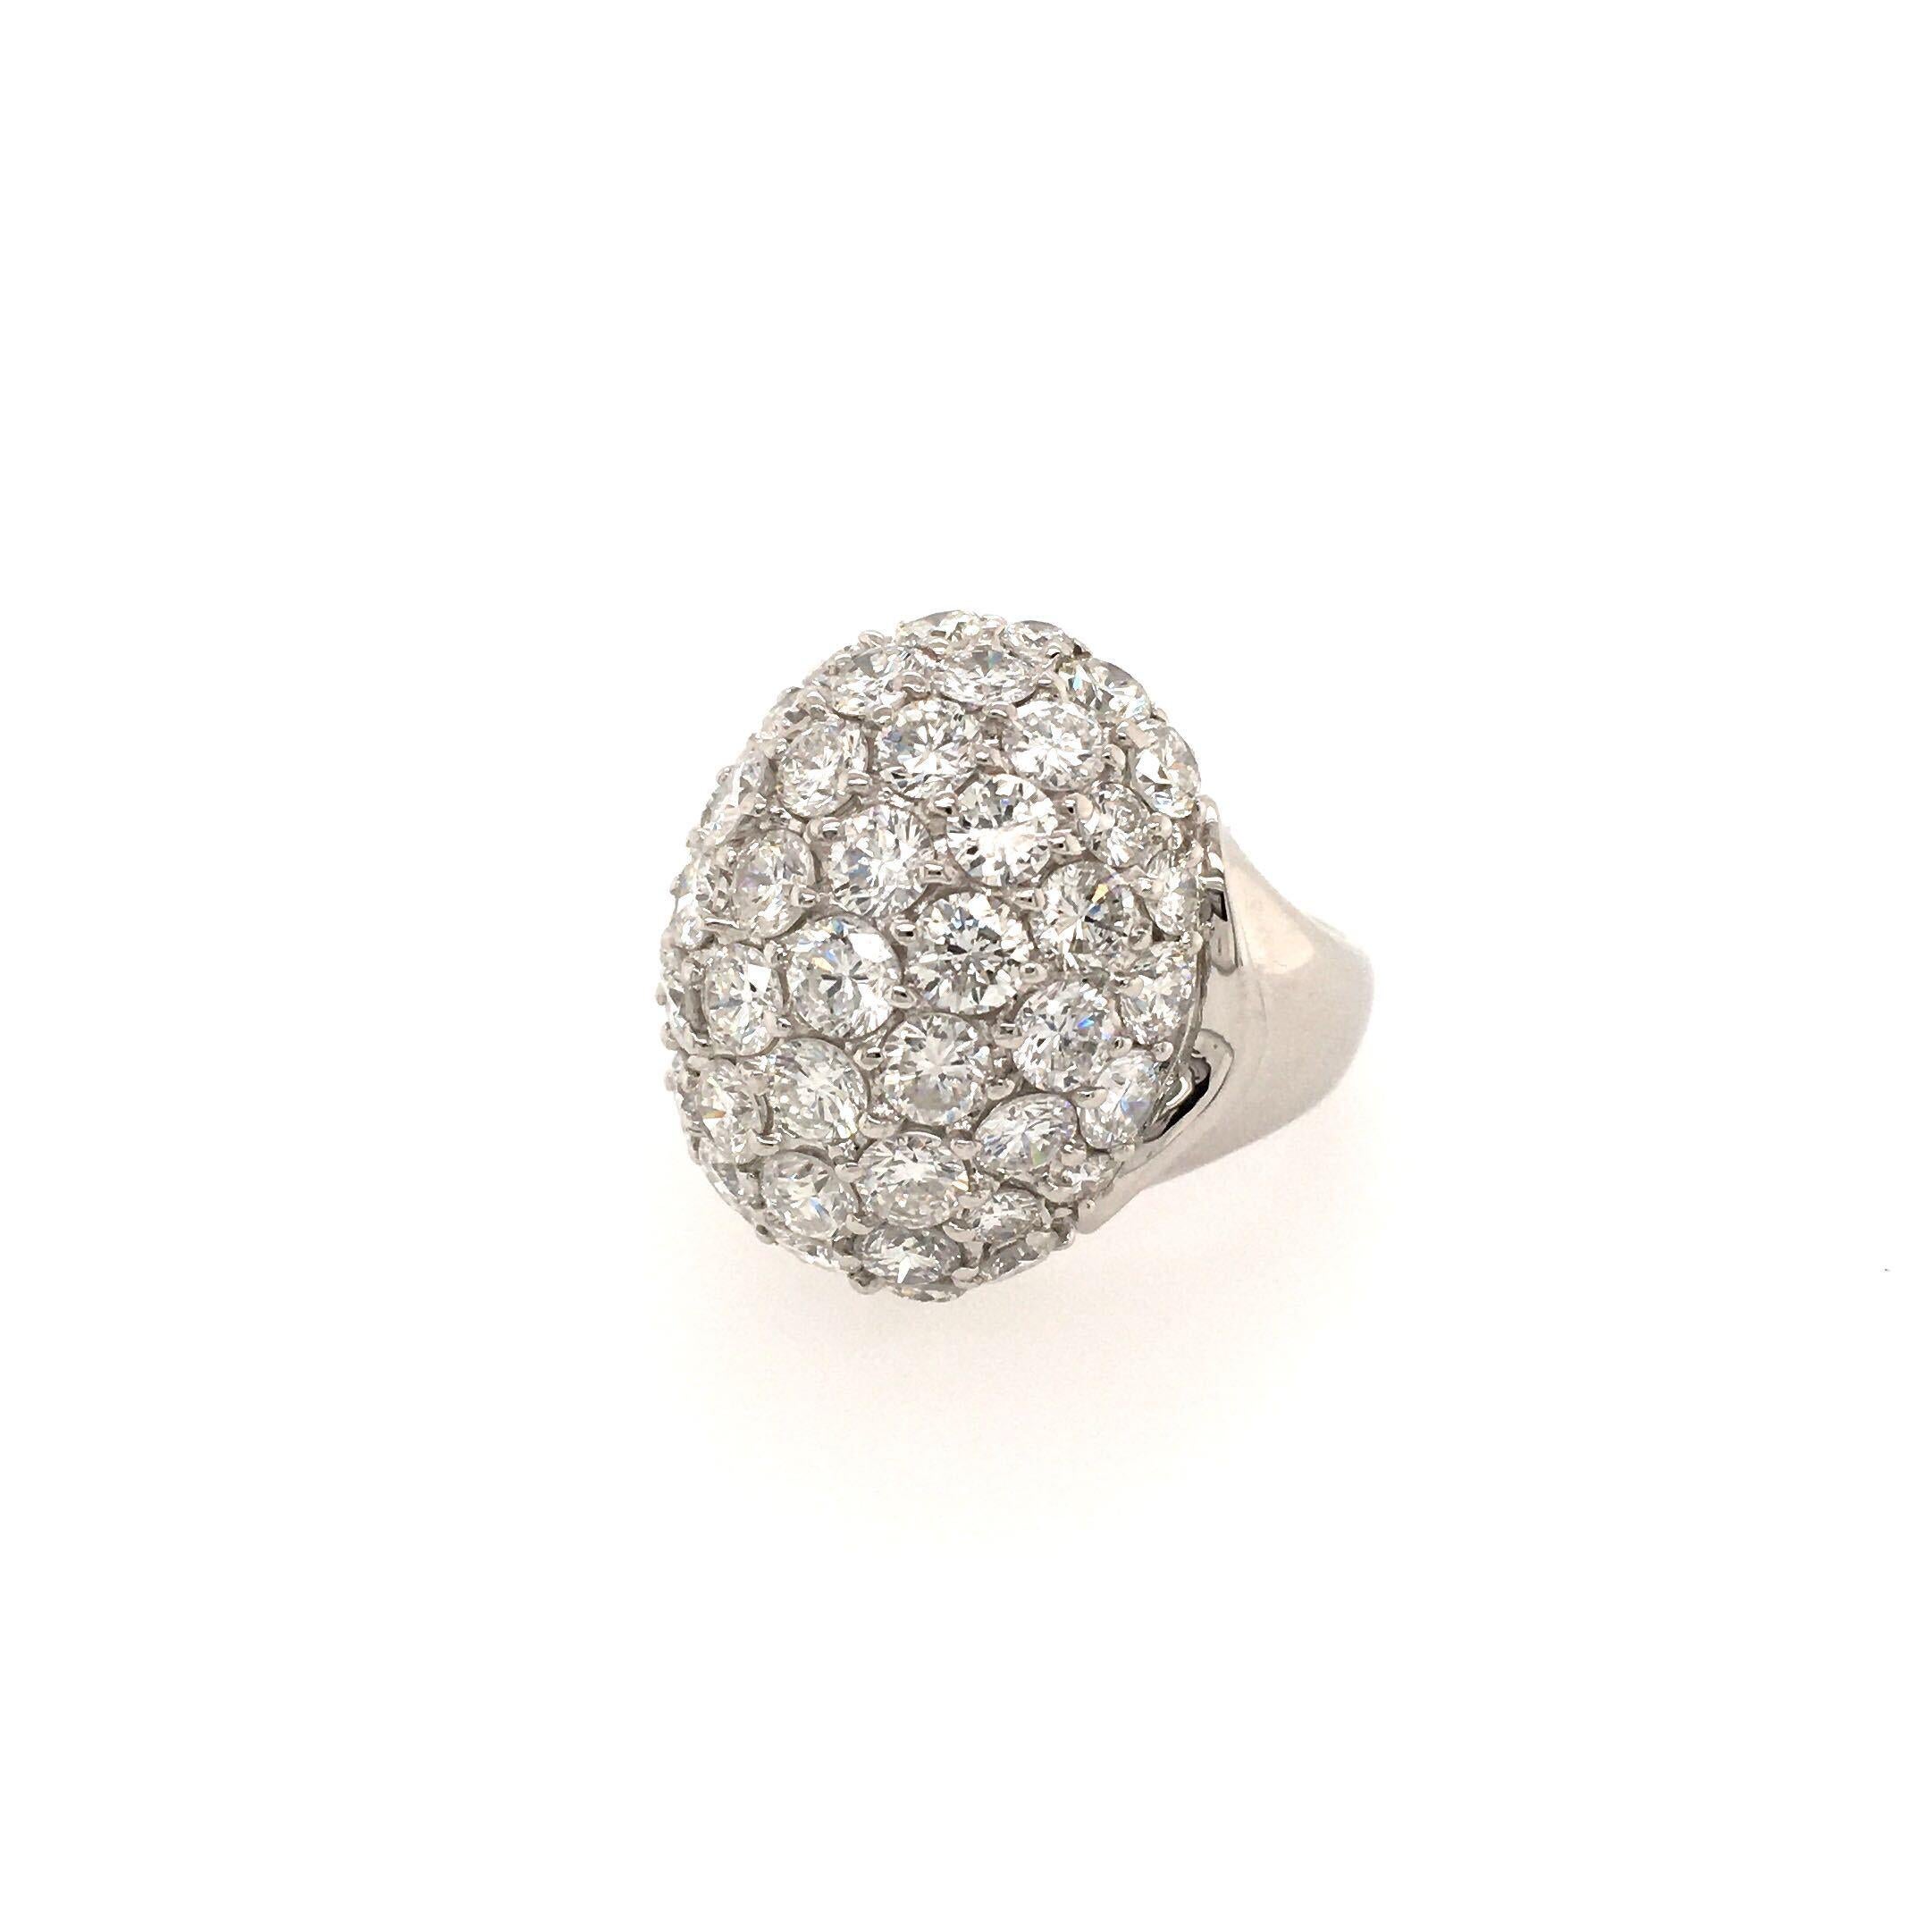 A platinum and diamond dome ring. The top pave set with diamonds, with polished shank. Total diamond weight approximately 5.03 carats. Size 6 1/4, gross weight is approximately 15.7 grams.
